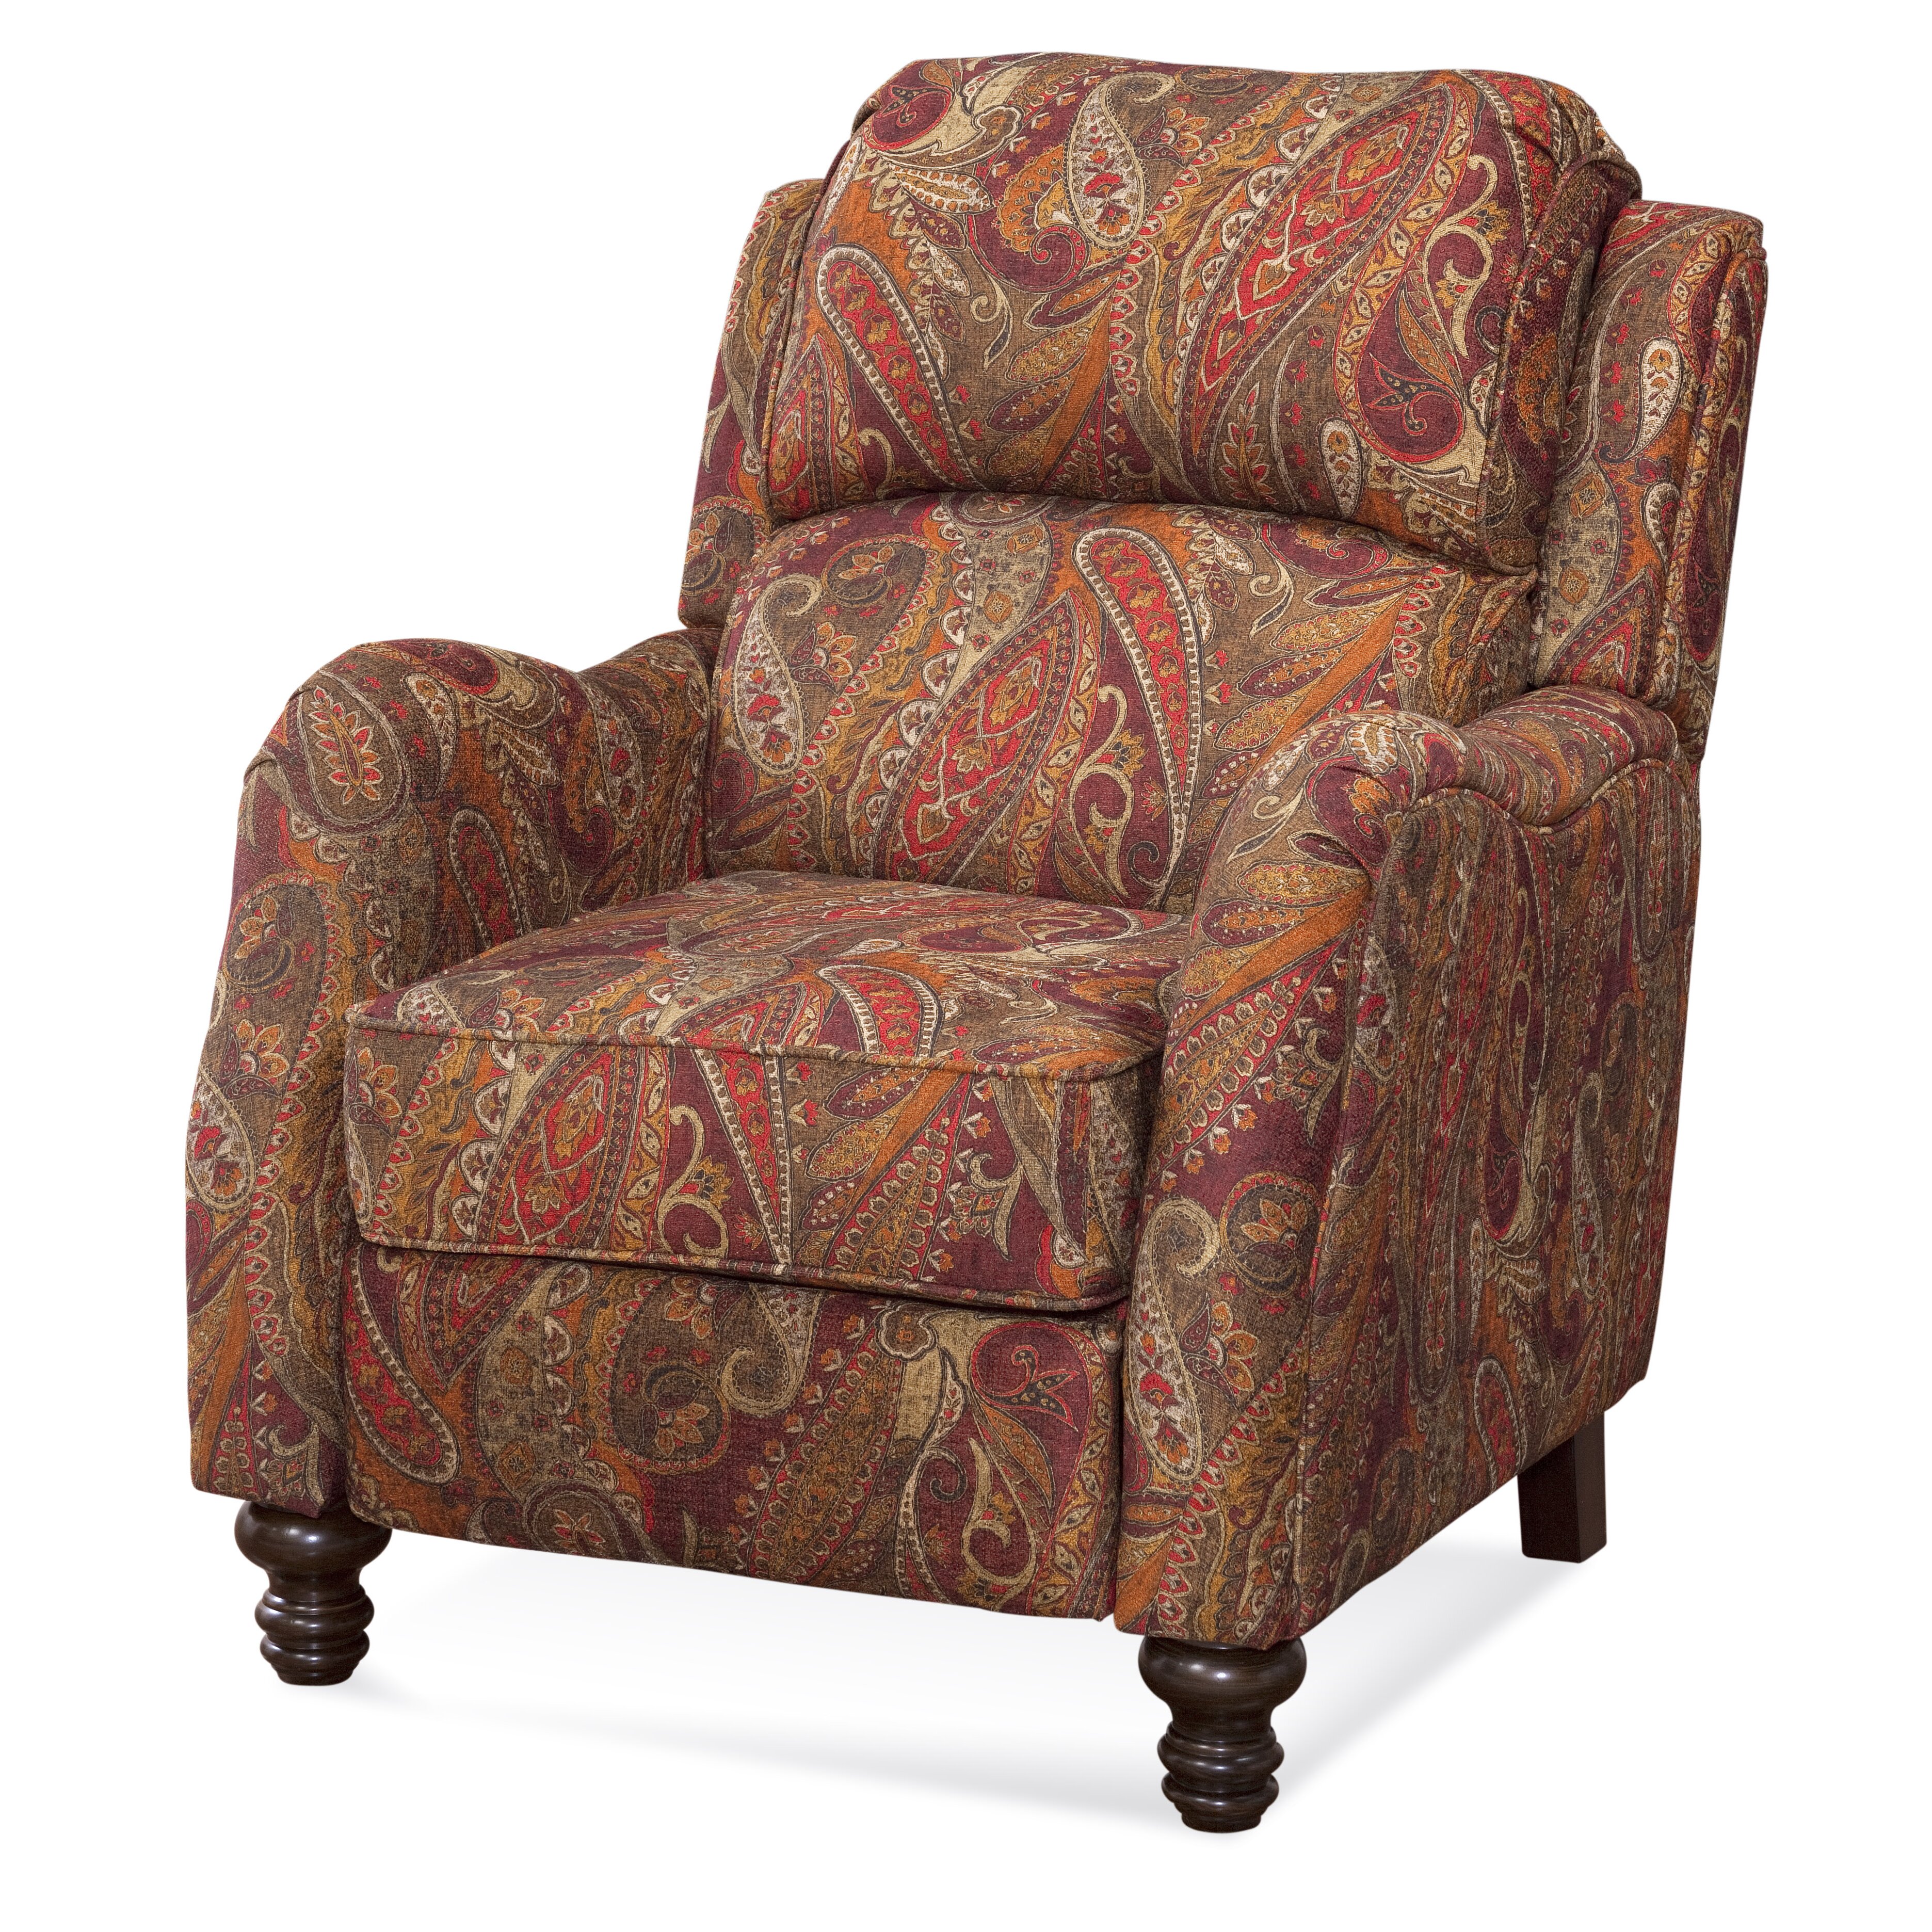 Upholstered Recliners